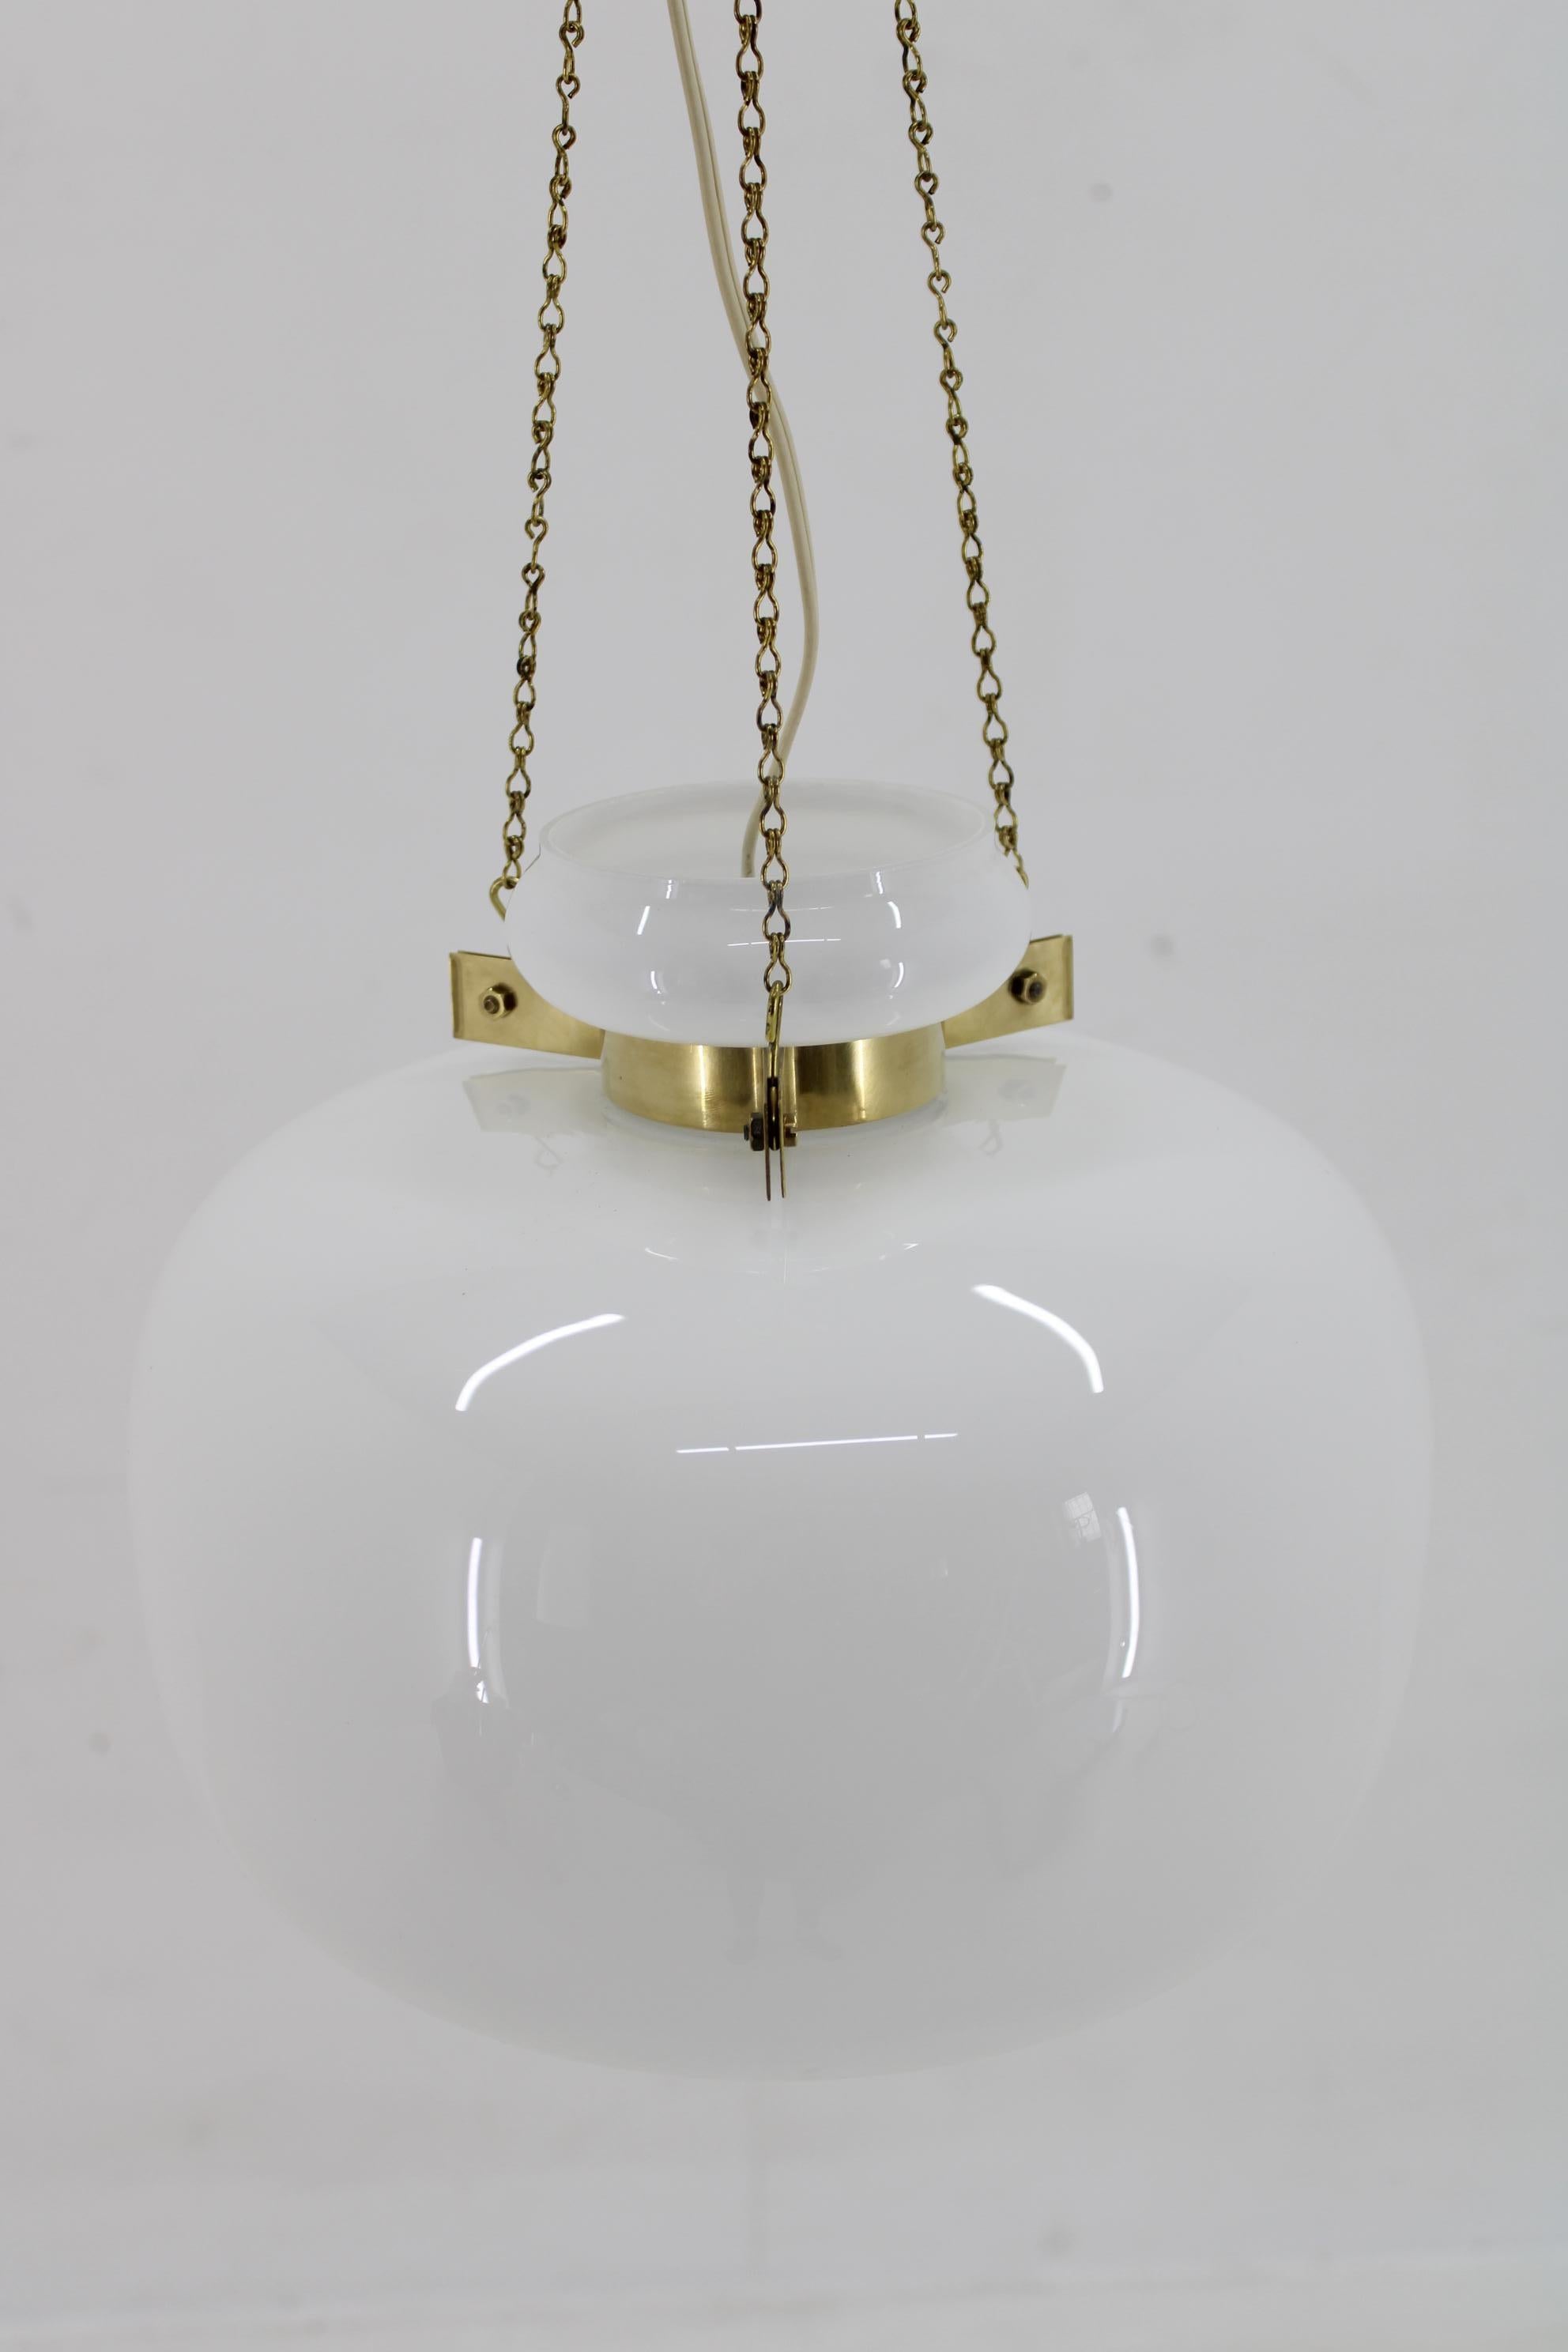 Mid-Century Modern 1970s Opaline Glass & Brass Pendant Light , 2 items available For Sale